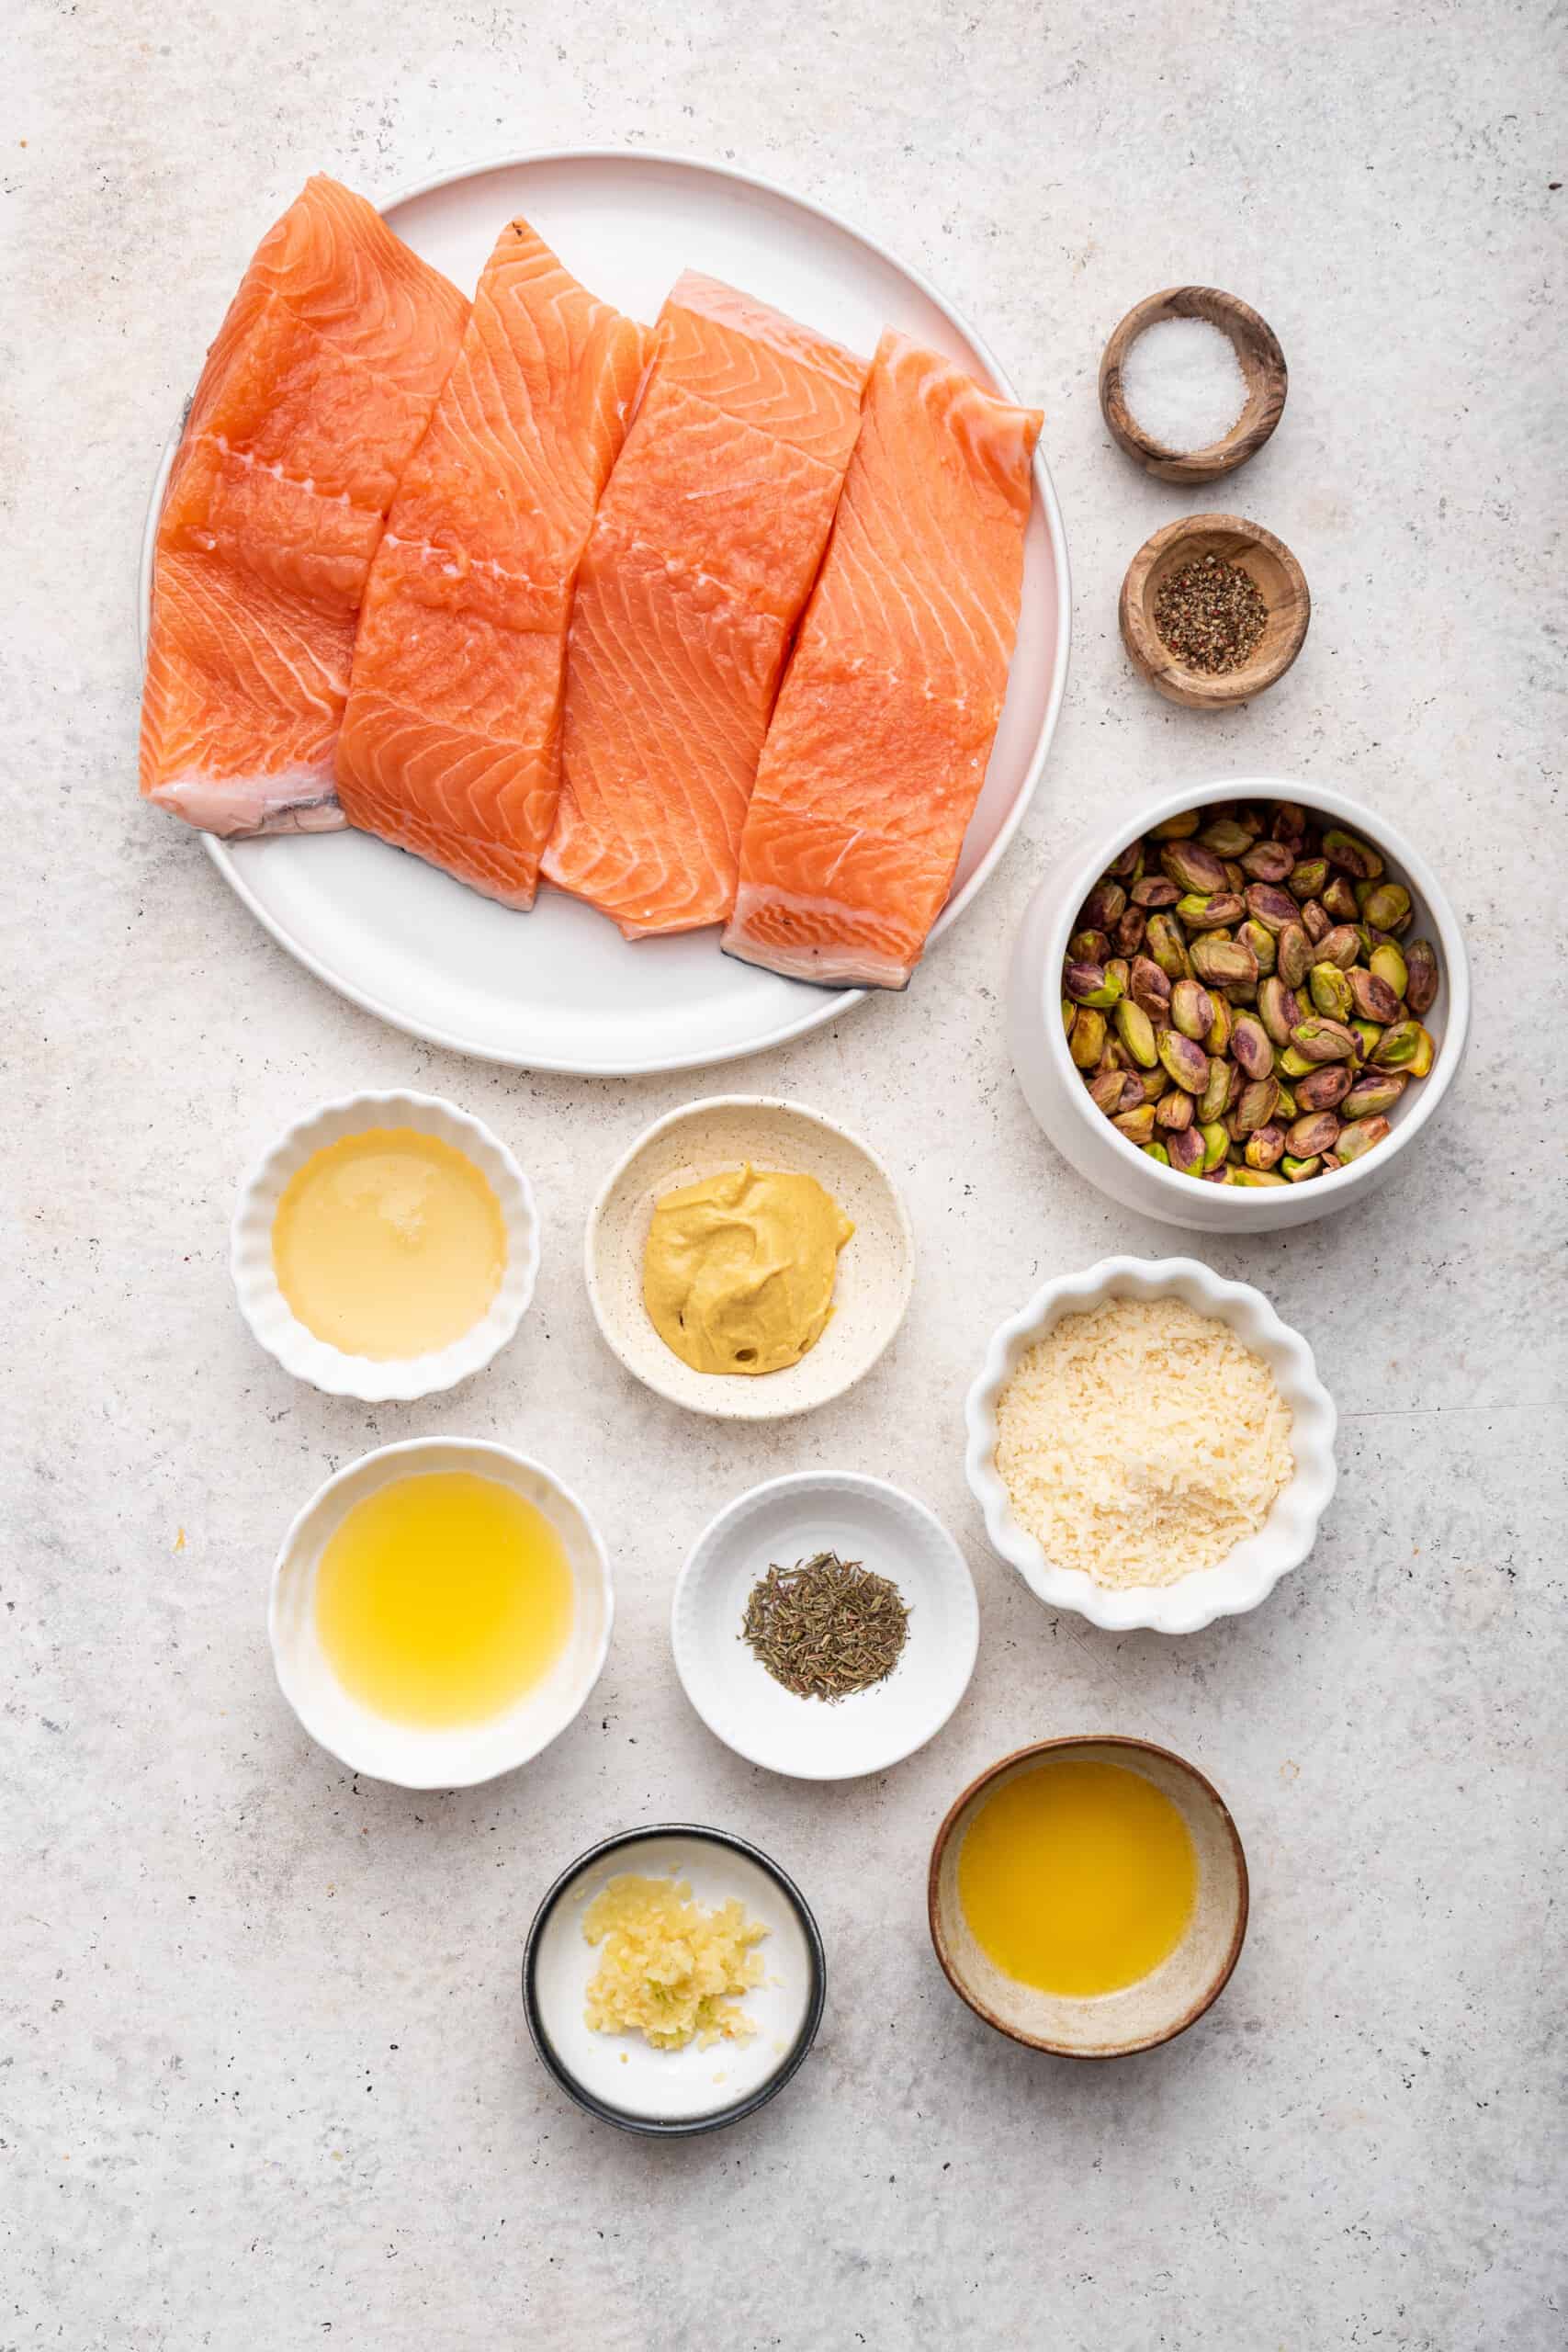 Overhead view of ingredients for pistachio crusted salmon